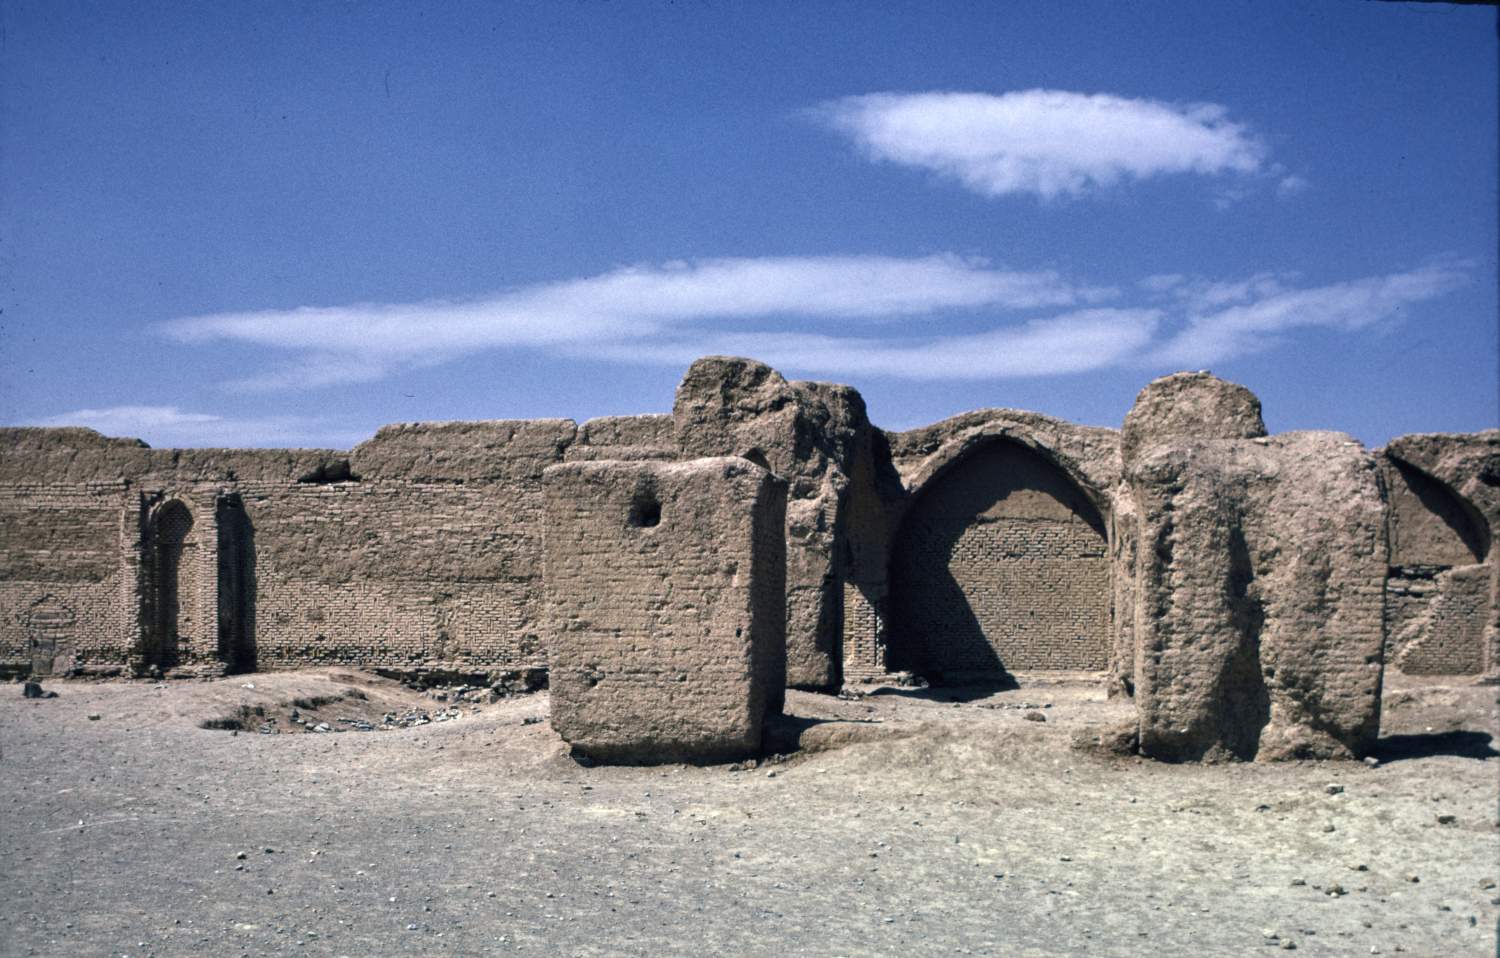 View toward southwestern enclosure wall (qibla wall) showing brick masonry from second building phase, and remnants of piers in foreground.